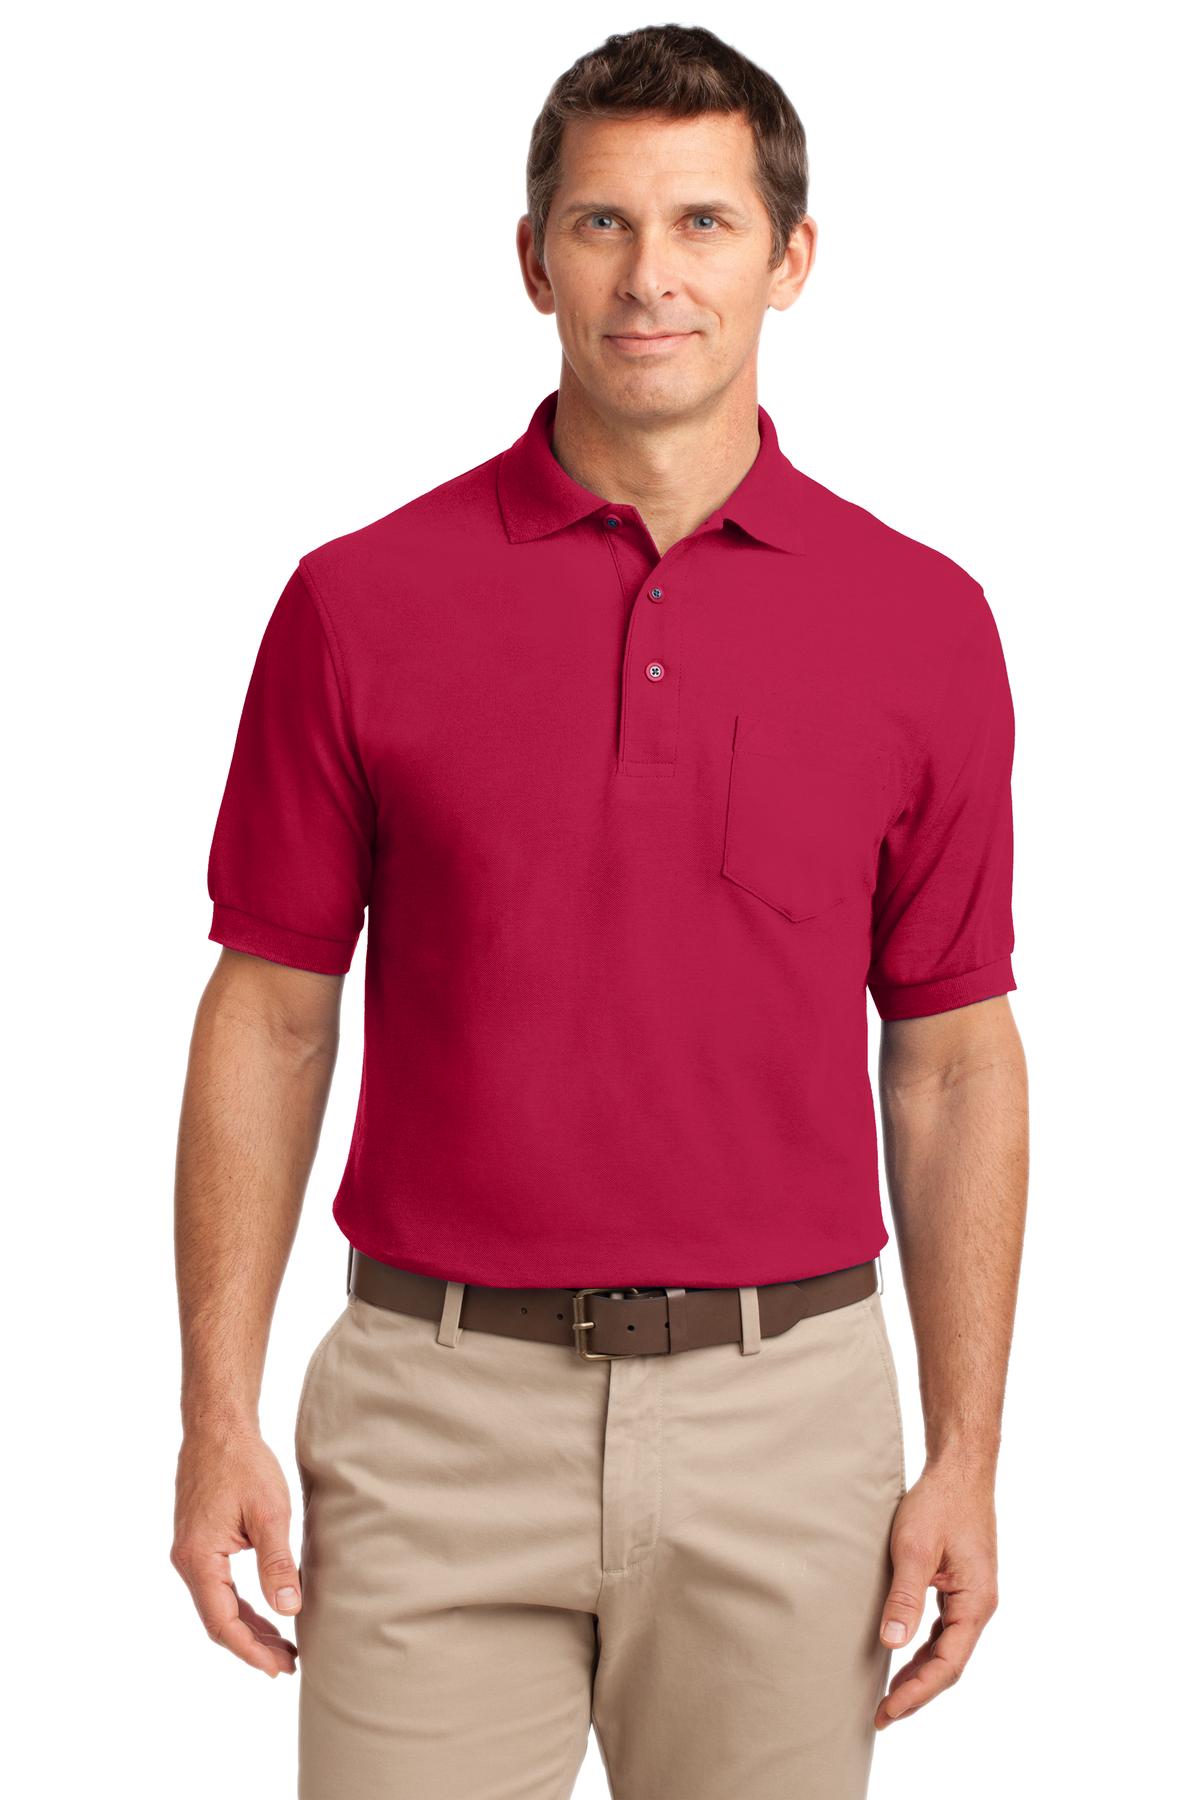 TLK500P Port Authority Tall Silk Touch Polo with Pocket 